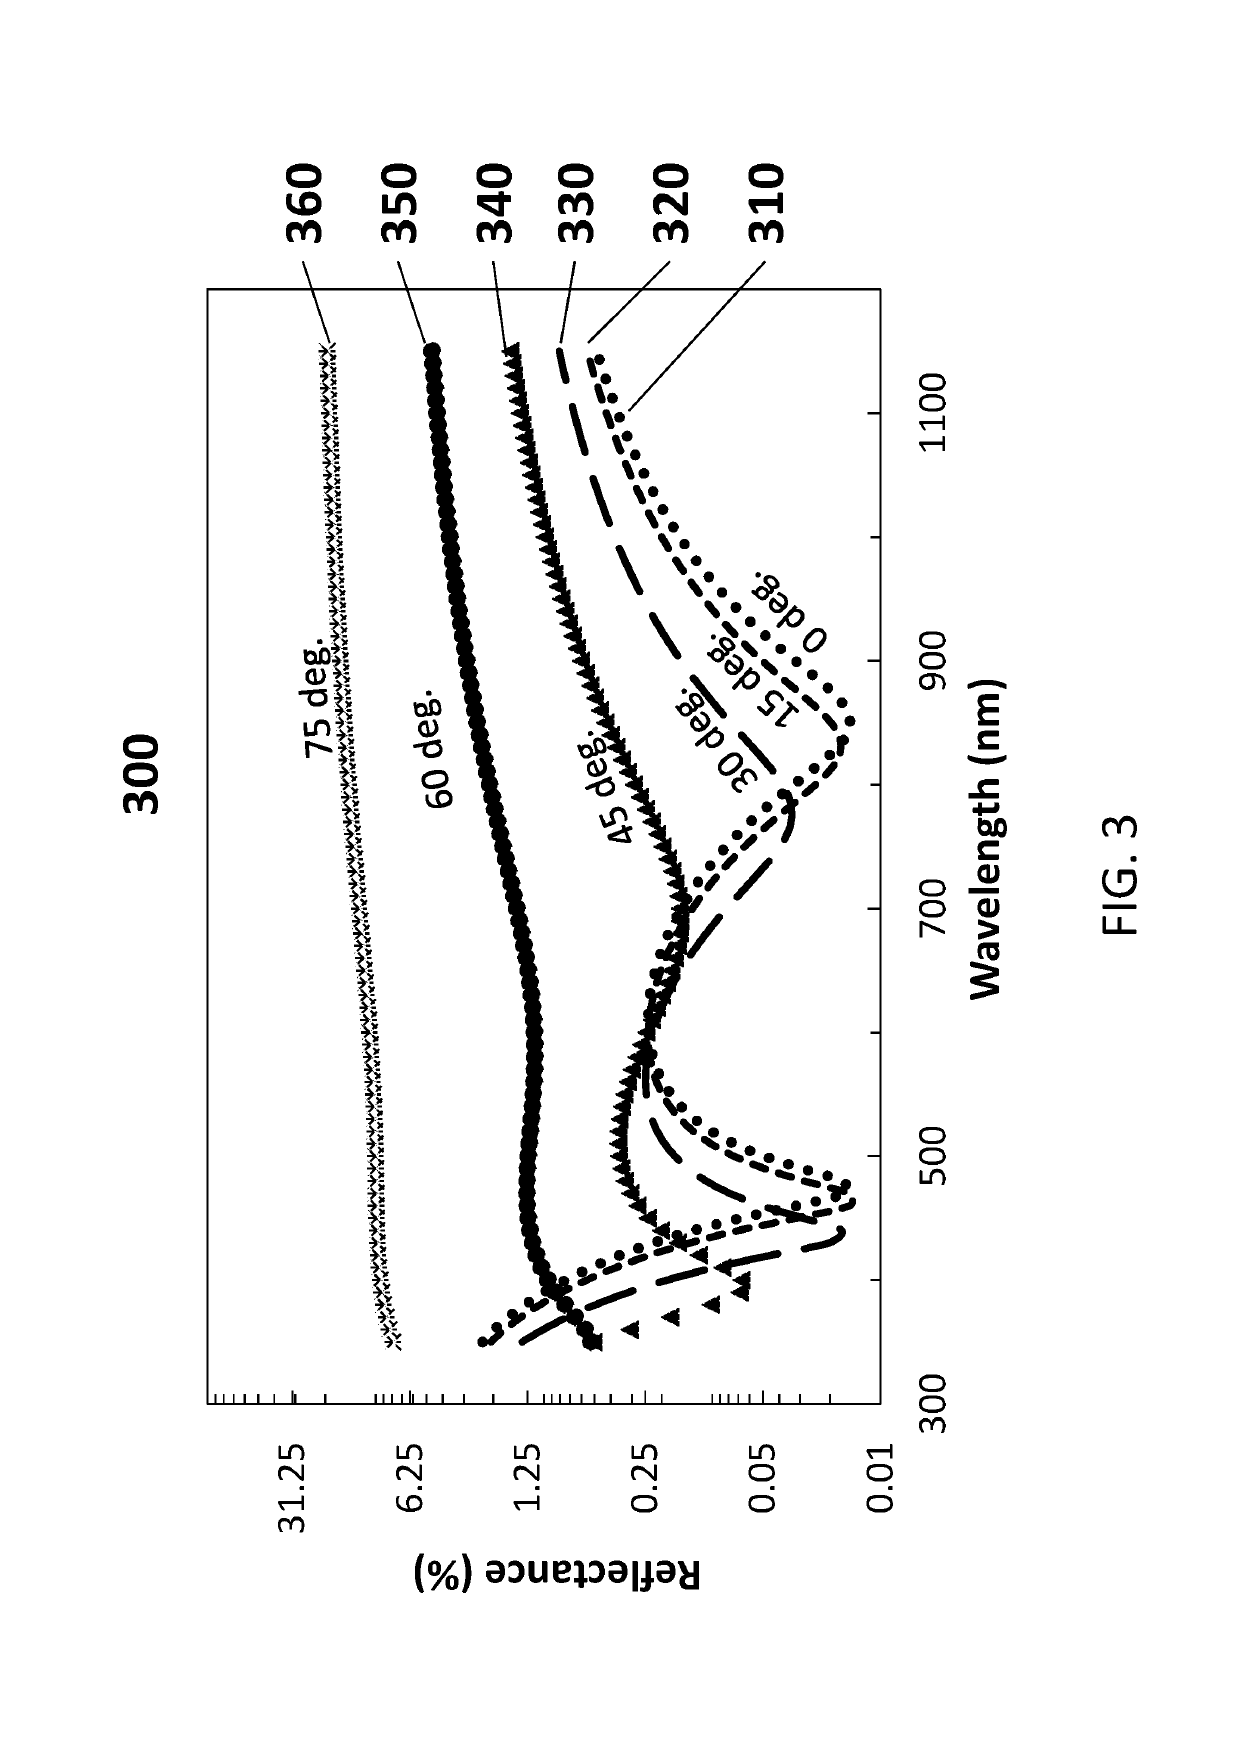 Highly durable hydrophobic antireflection structures and method of manufacturing the same